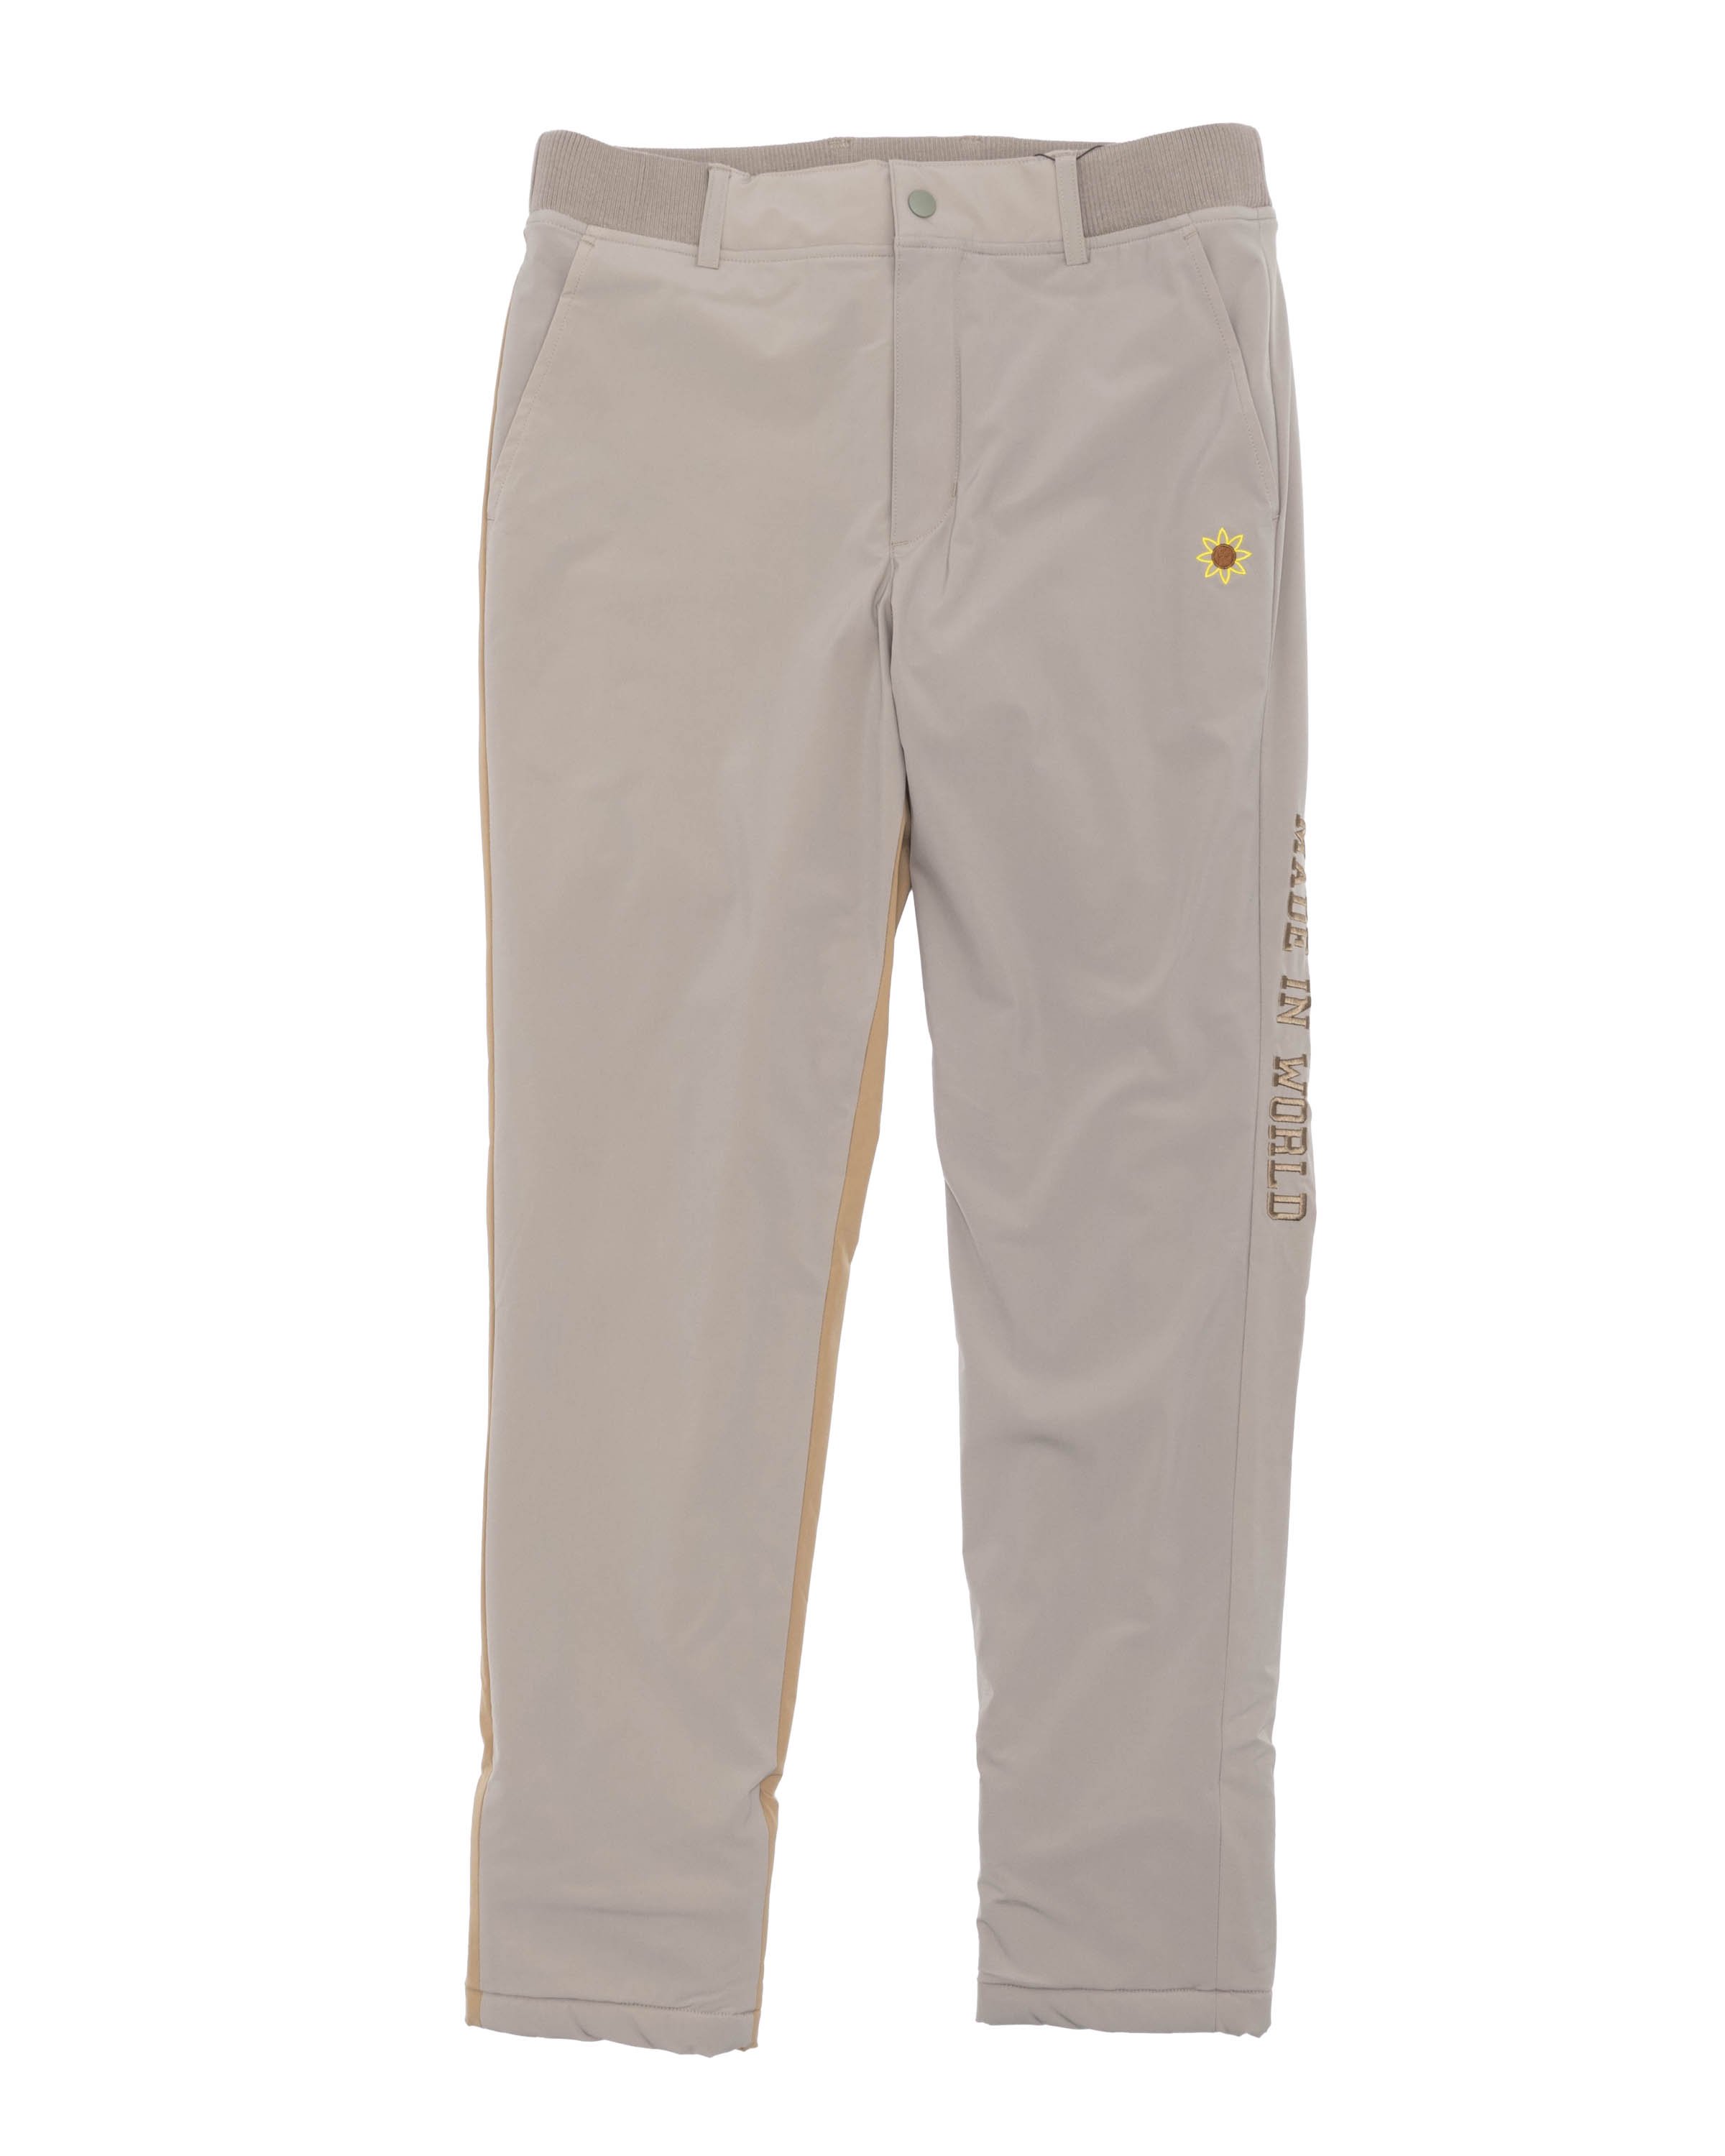 <img class='new_mark_img1' src='https://img.shop-pro.jp/img/new/icons14.gif' style='border:none;display:inline;margin:0px;padding:0px;width:auto;' />FUR RIB PANTS<br />beige